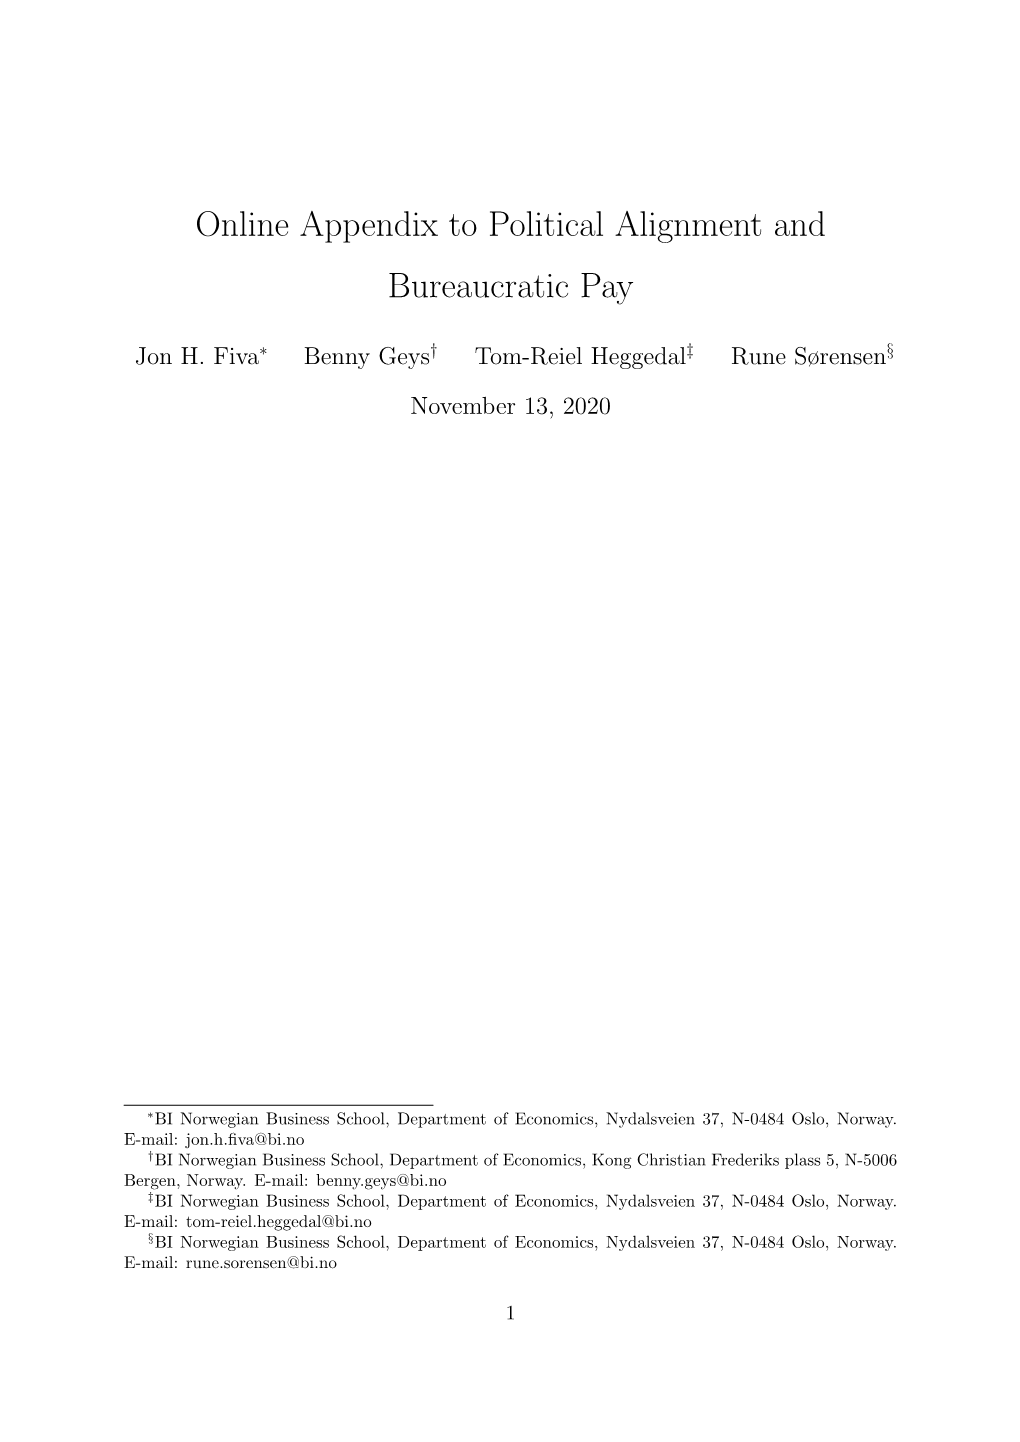 Online Appendix to Political Alignment and Bureaucratic Pay